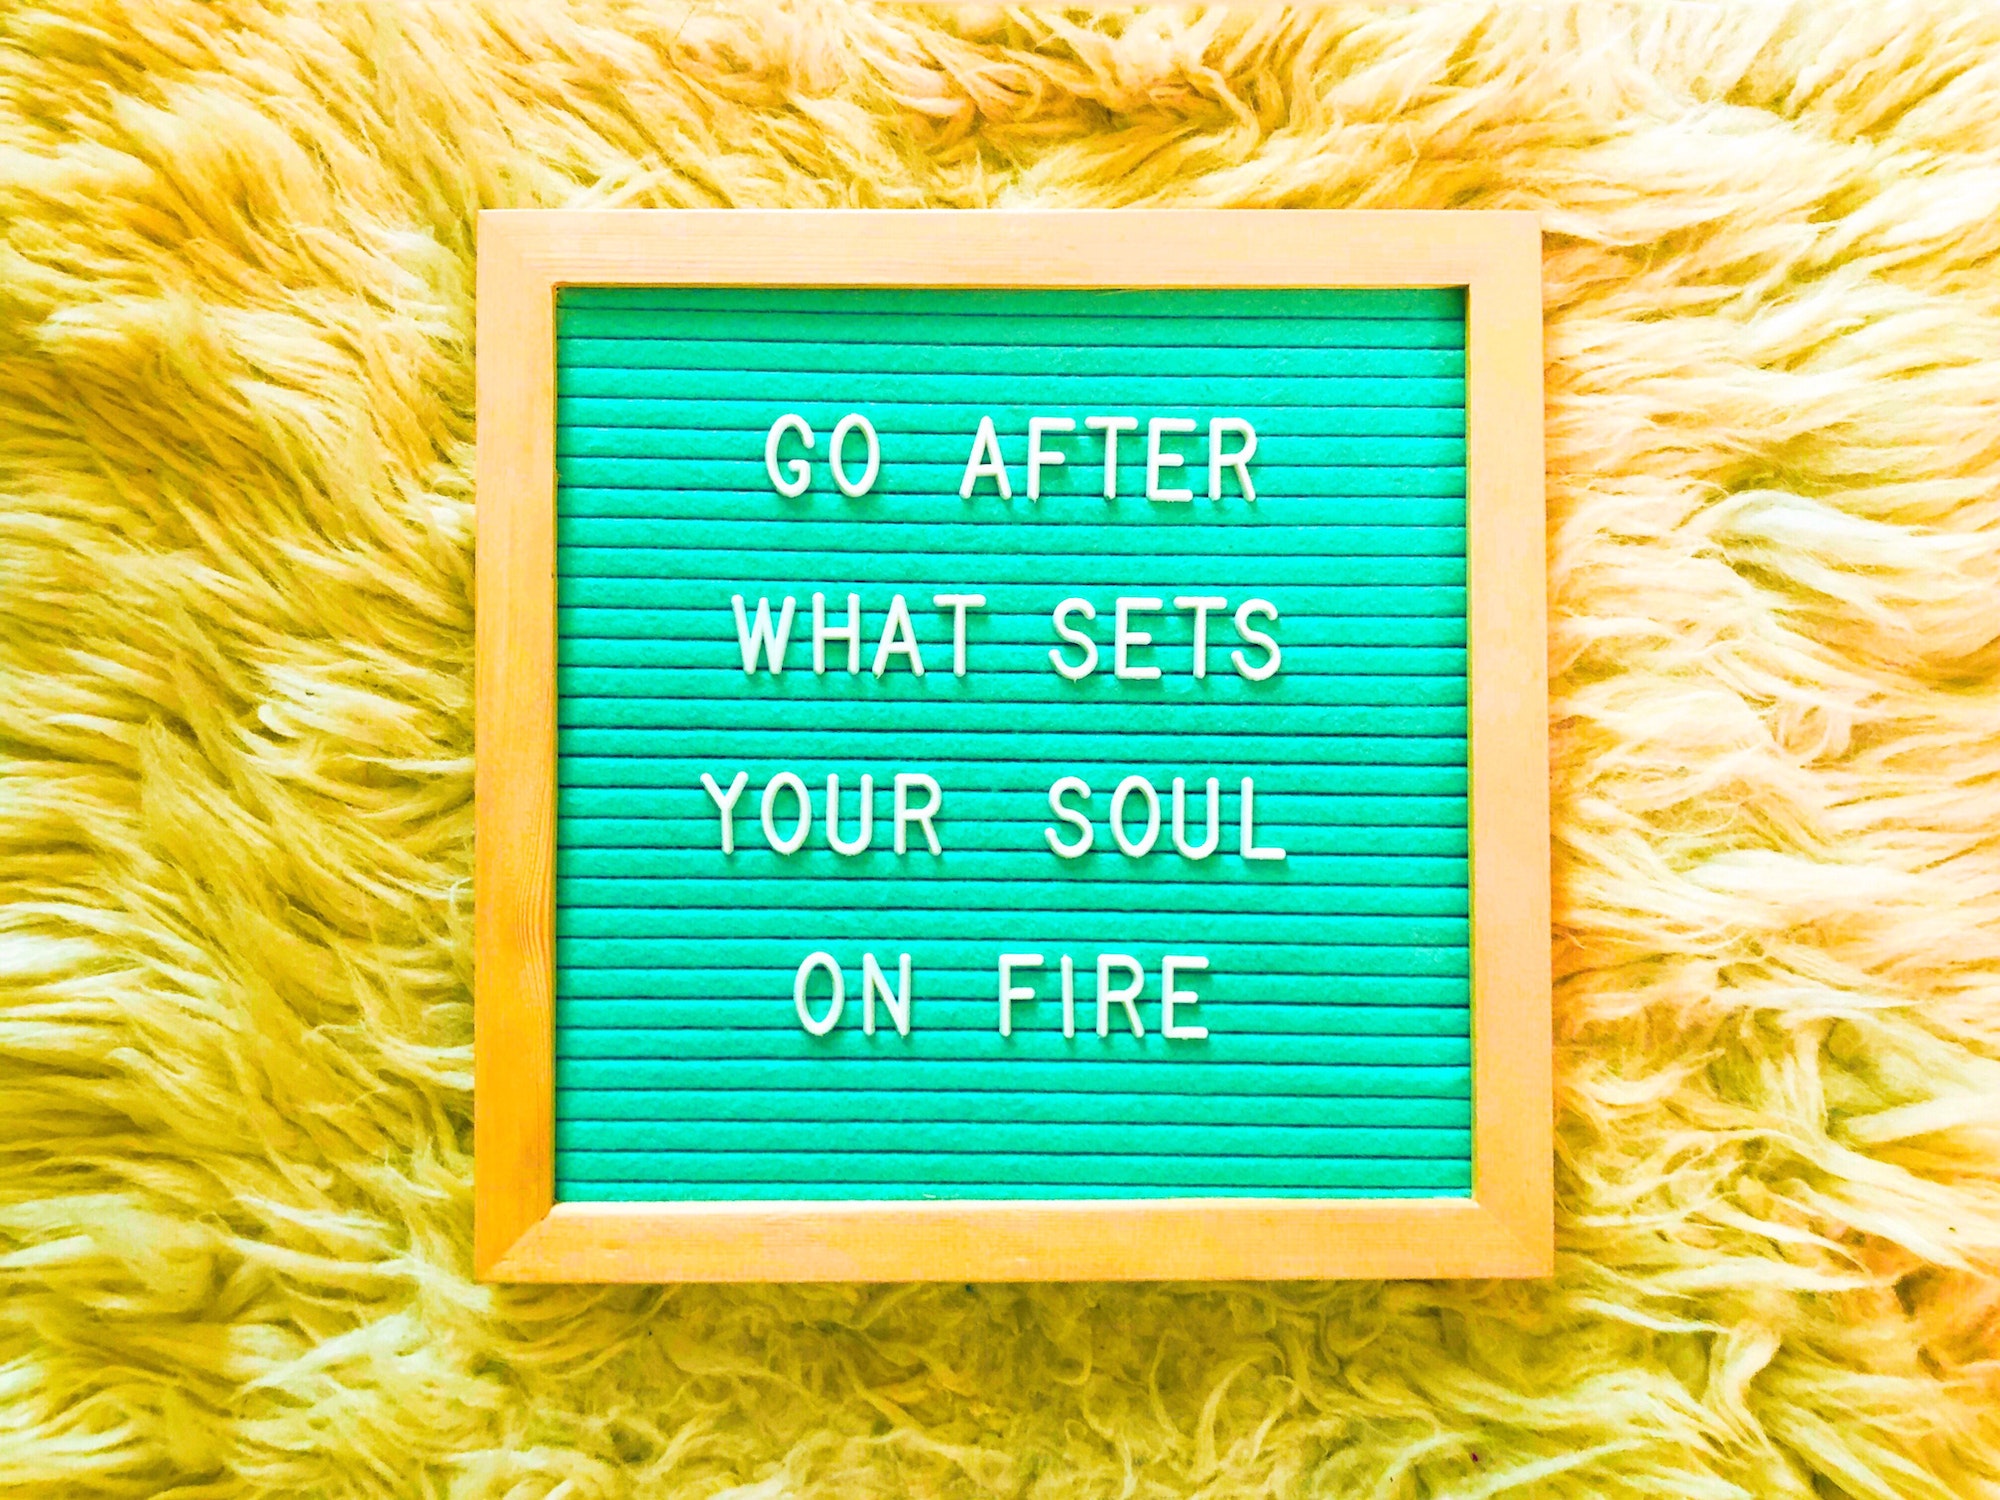 Go after what sets your soul on fire